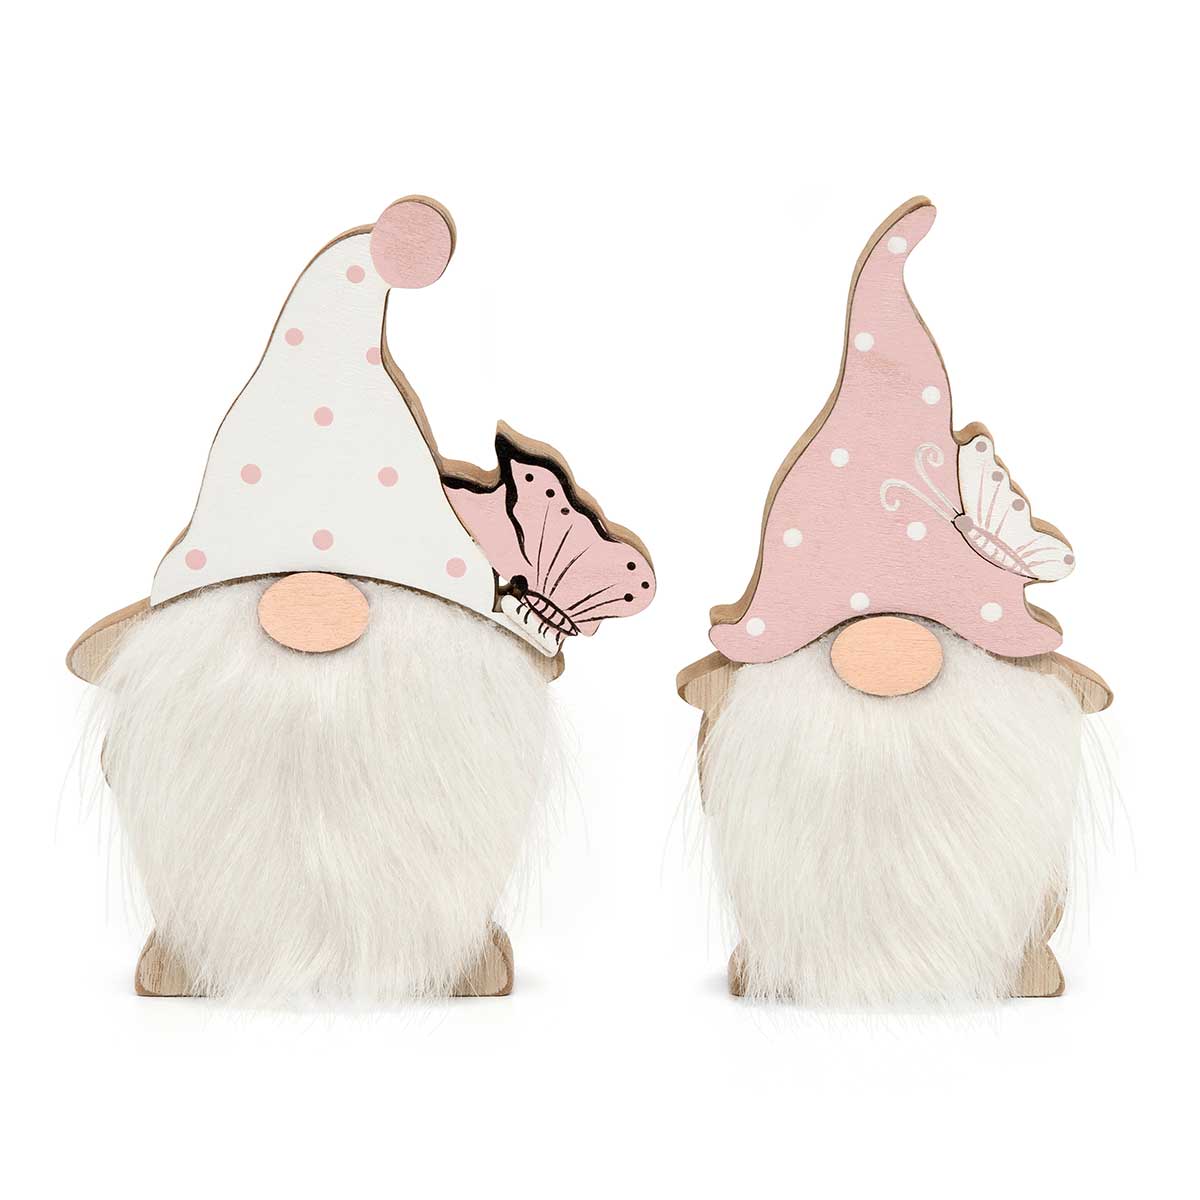 WOOD GNOME SIT-A-BOUT PINK/WHITE PINDOT WITH BUTTERFLY